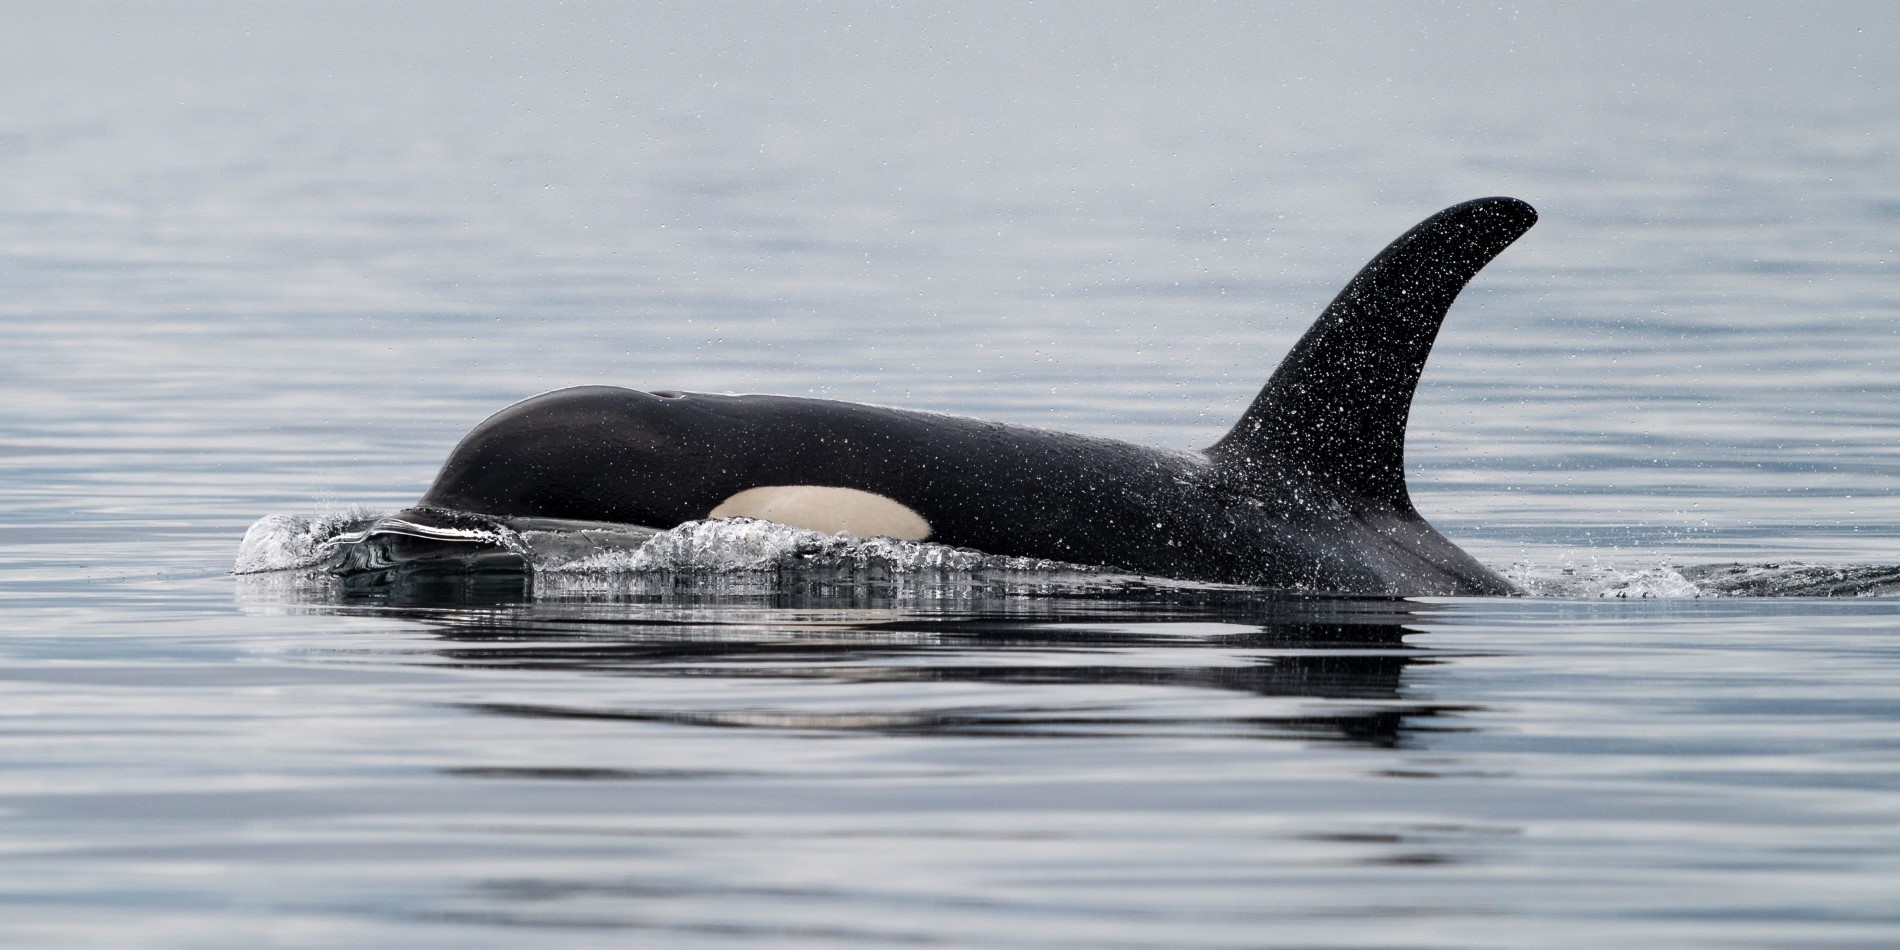 An orca in the surface of the water